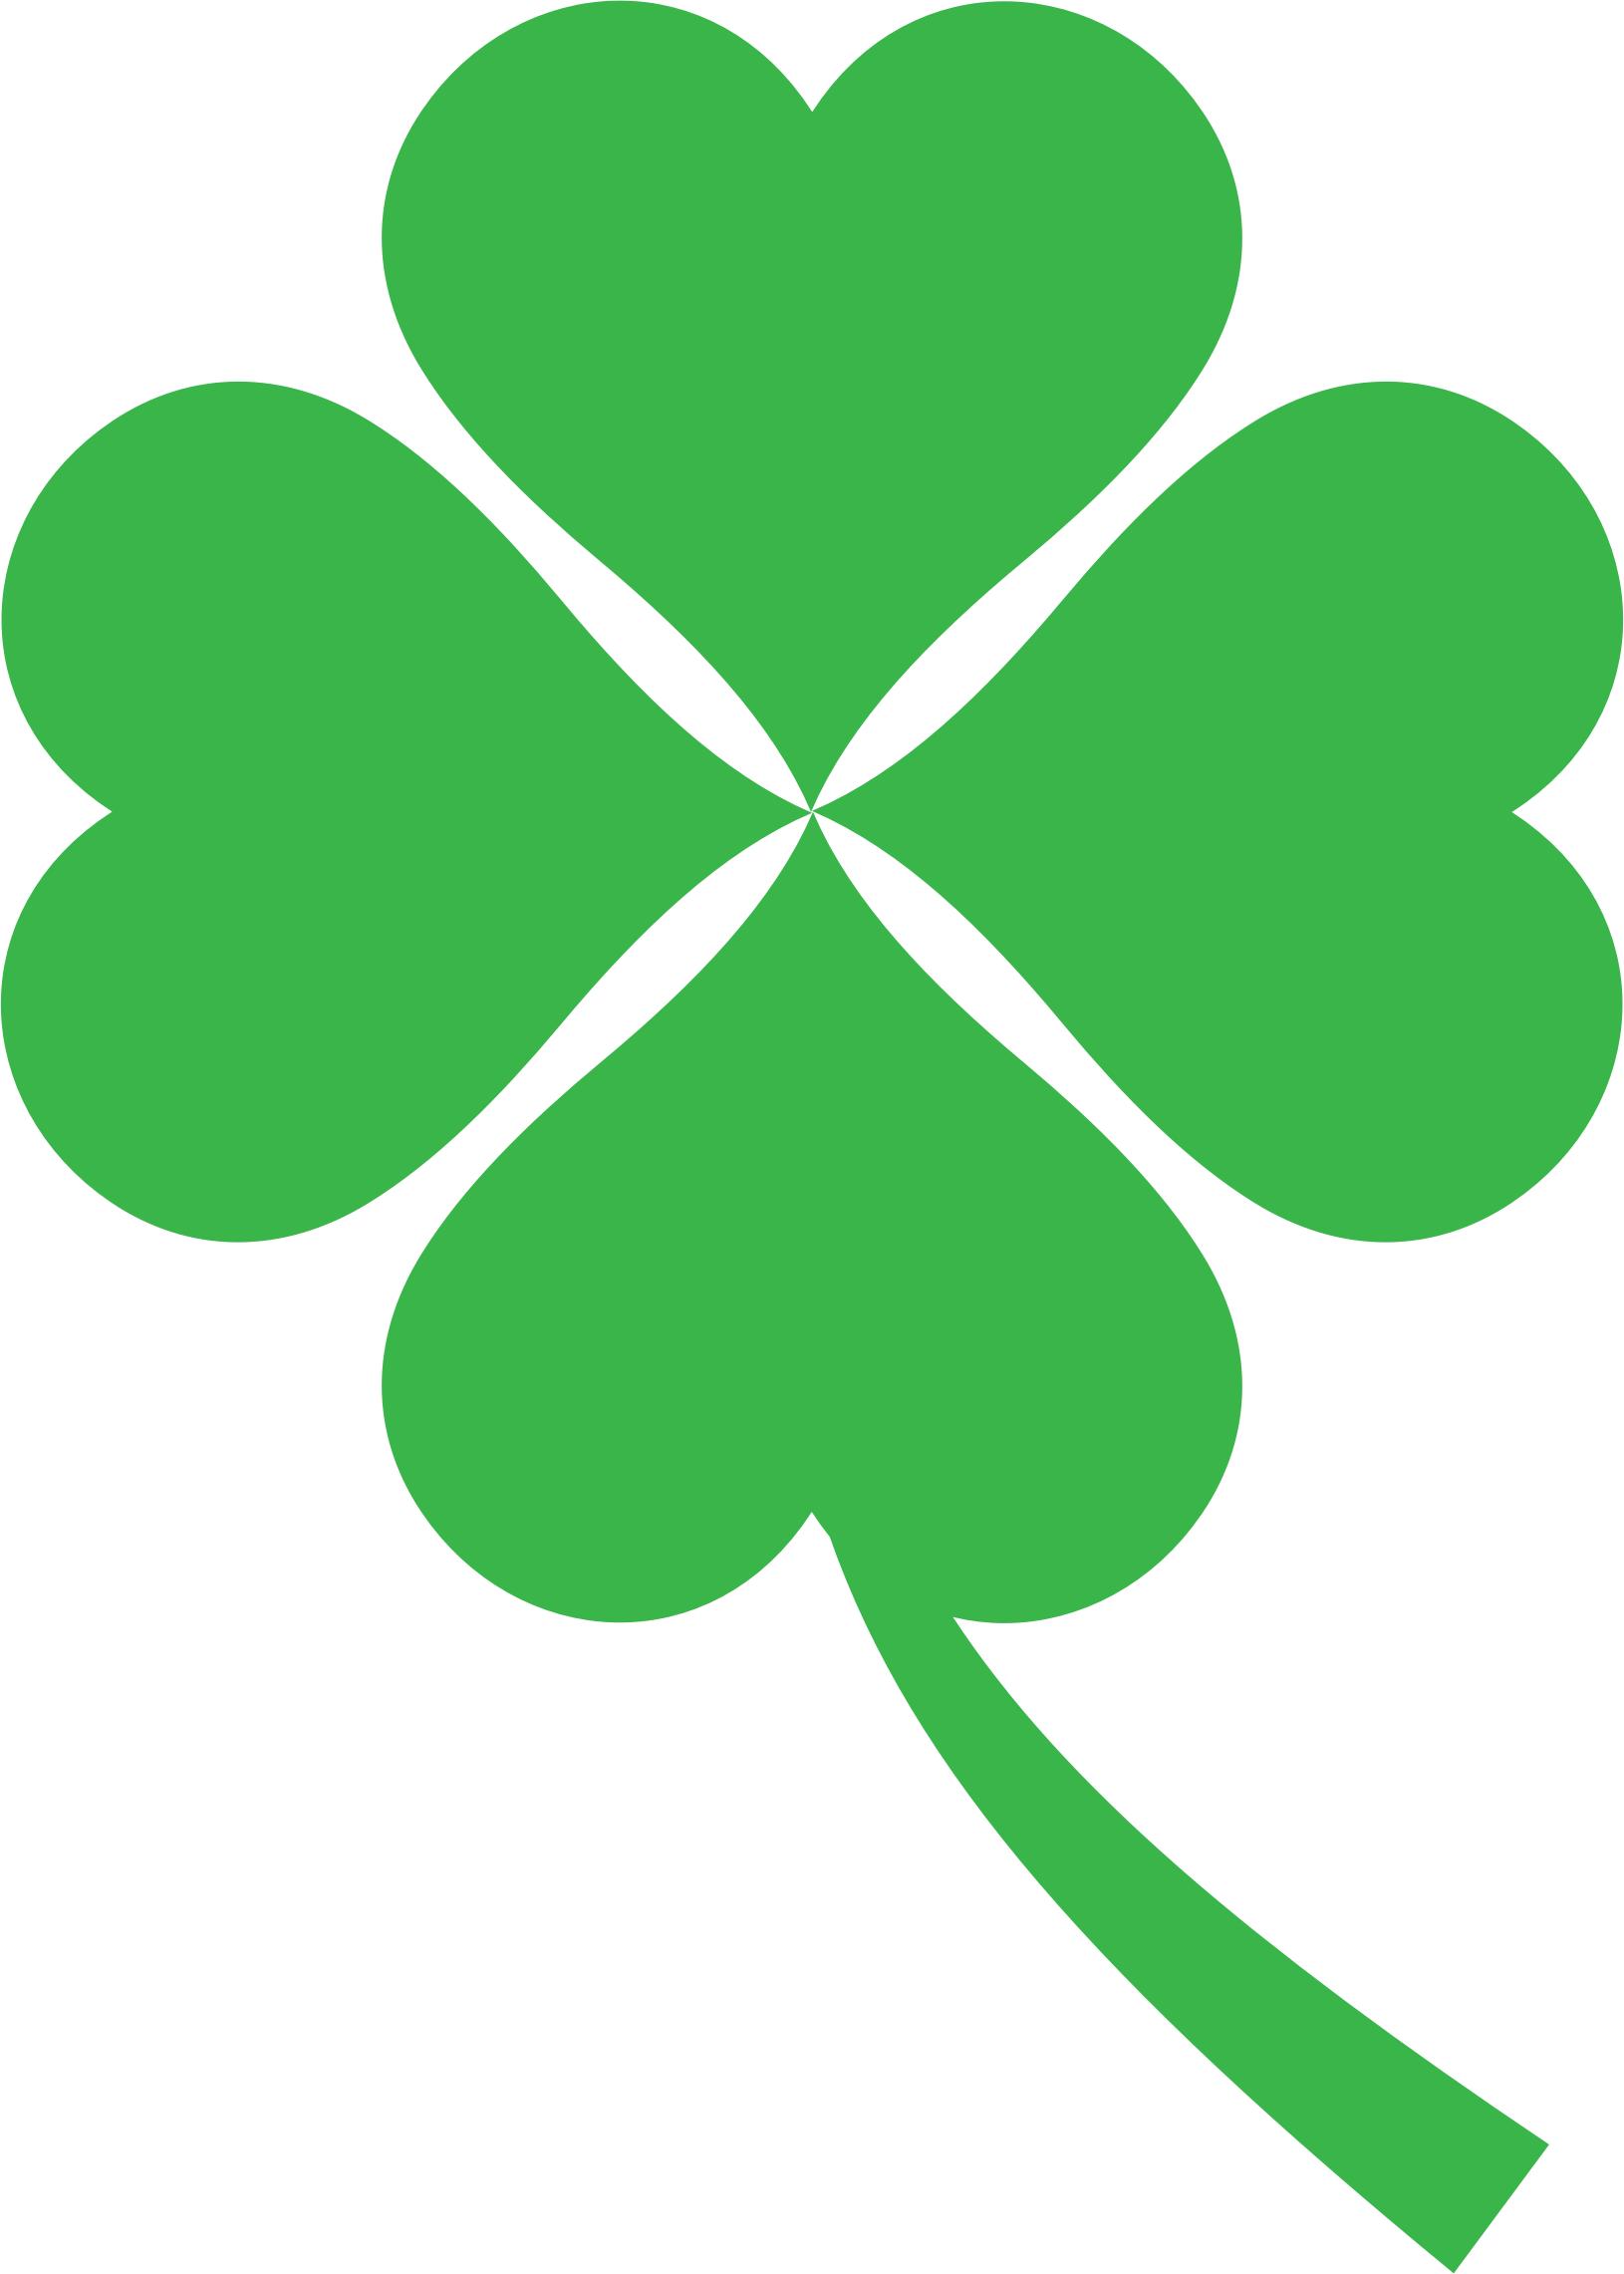 Green Four Leaf Clover Icons PNG - Free PNG and Icons Downloads